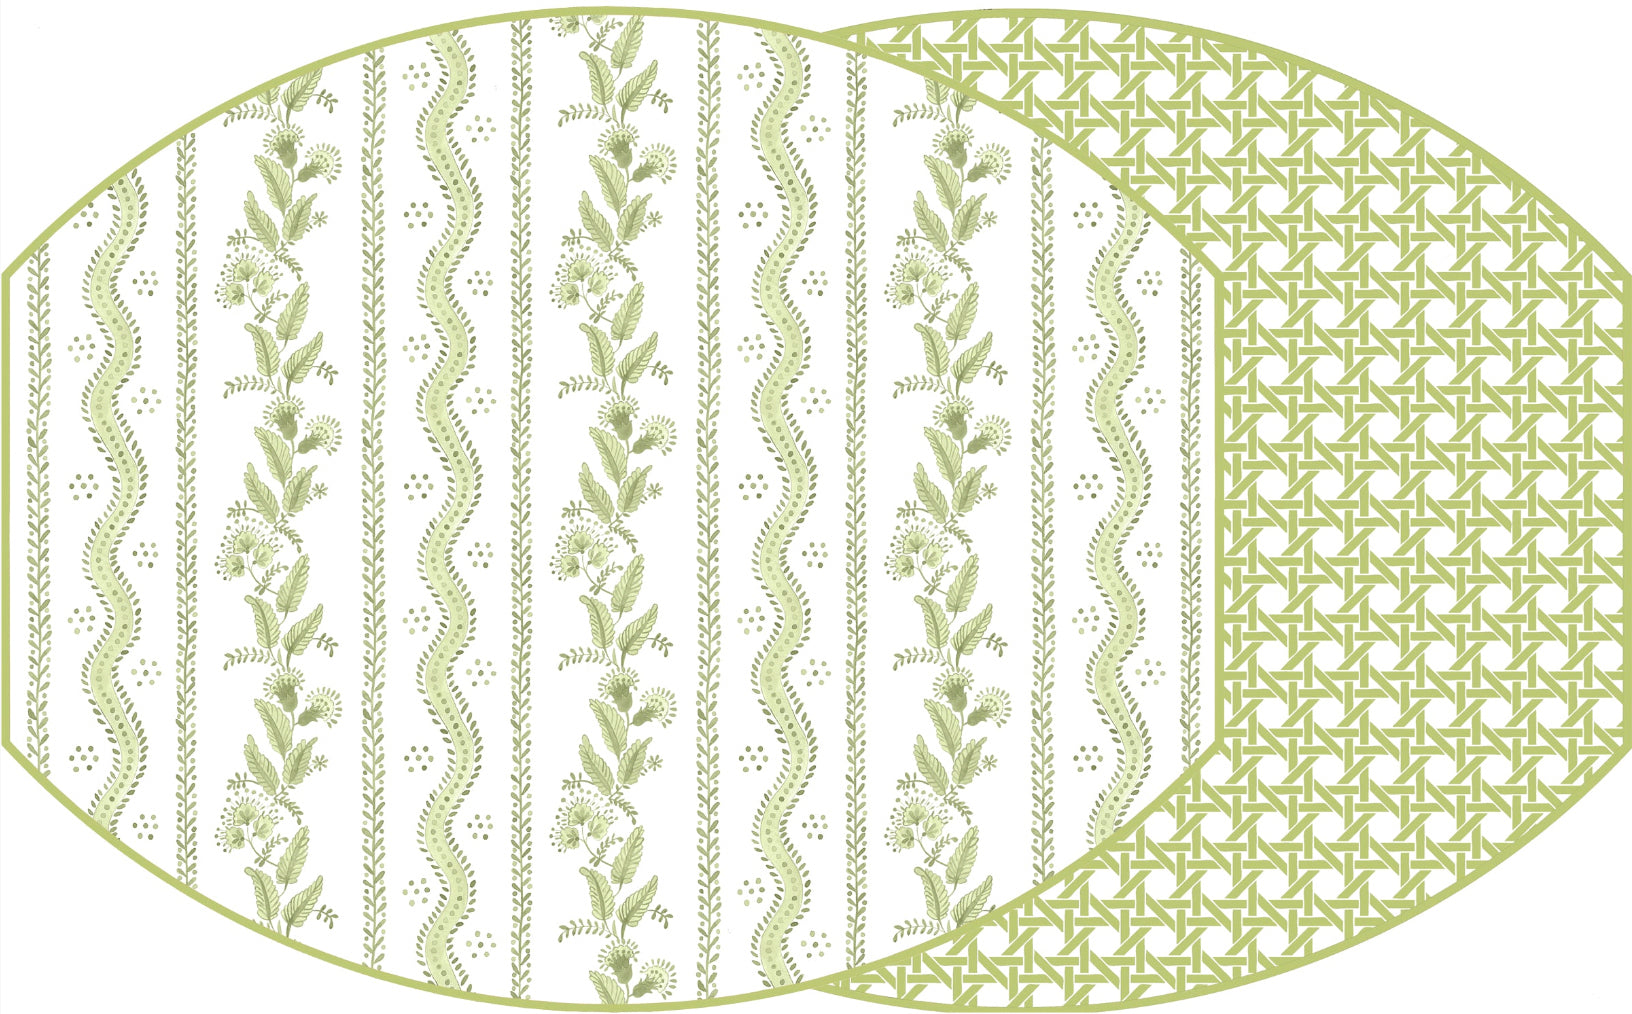 ELLIPSE TWO SIDED EMMA AND CANE PLACEMAT ~ LIME